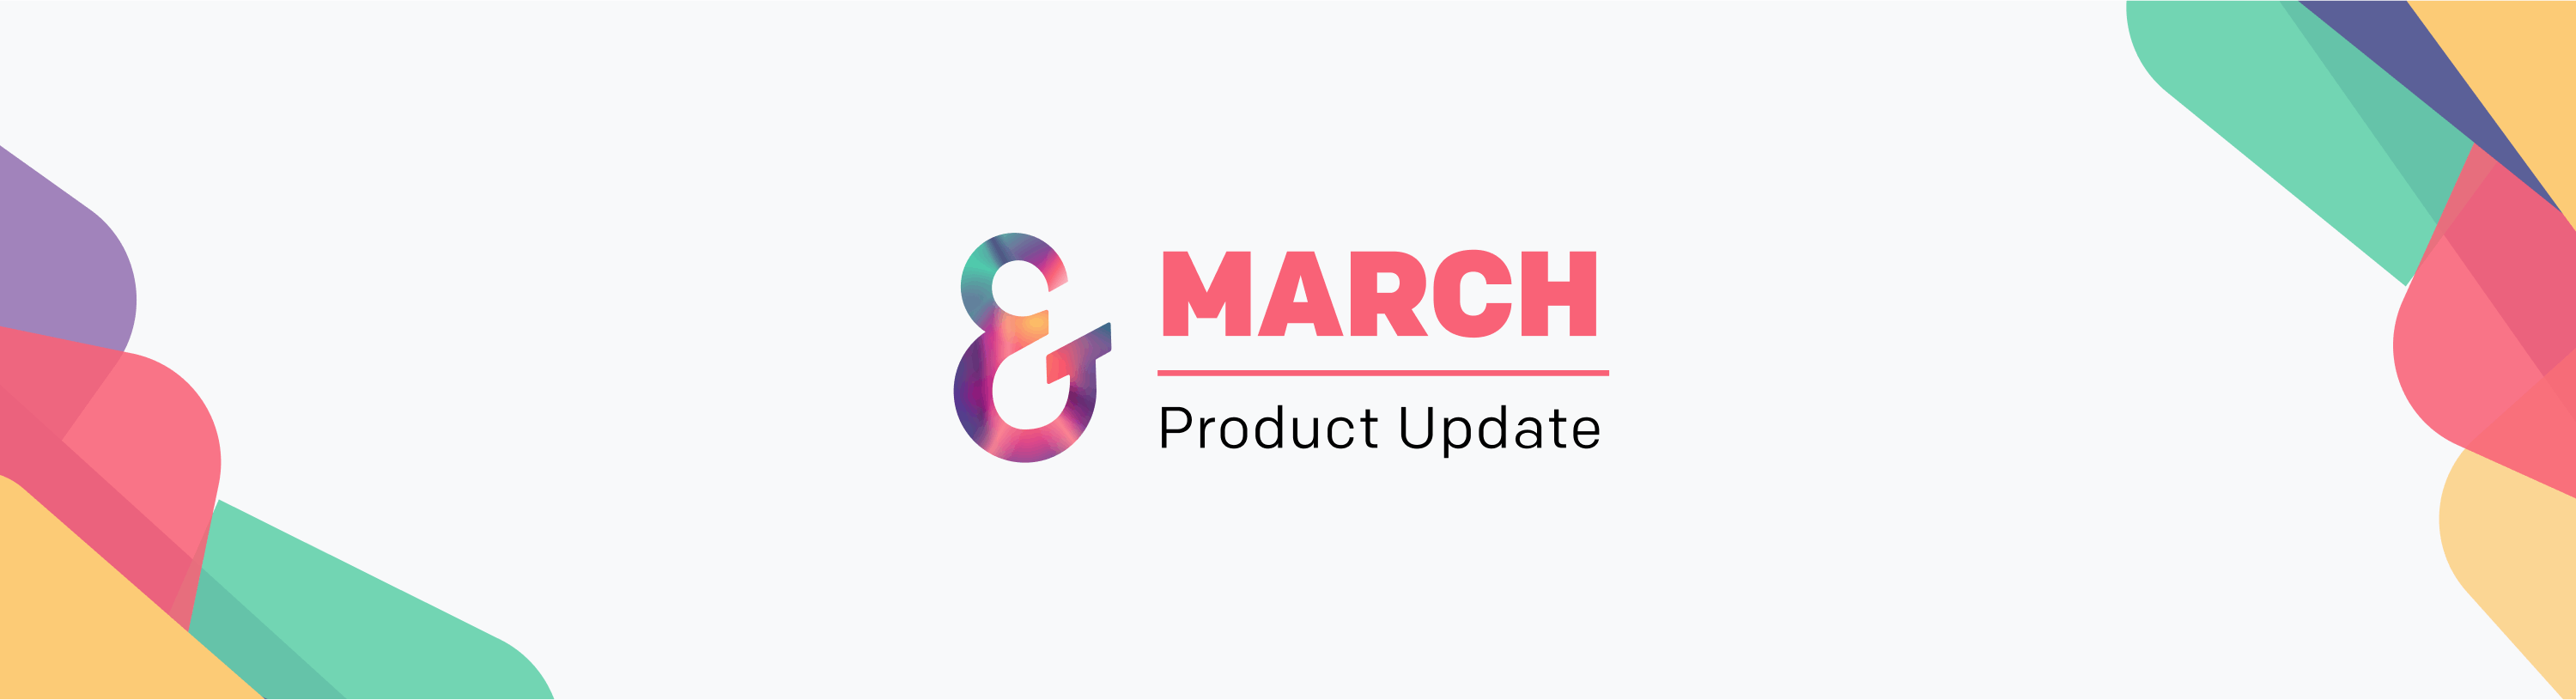 Ember March product update